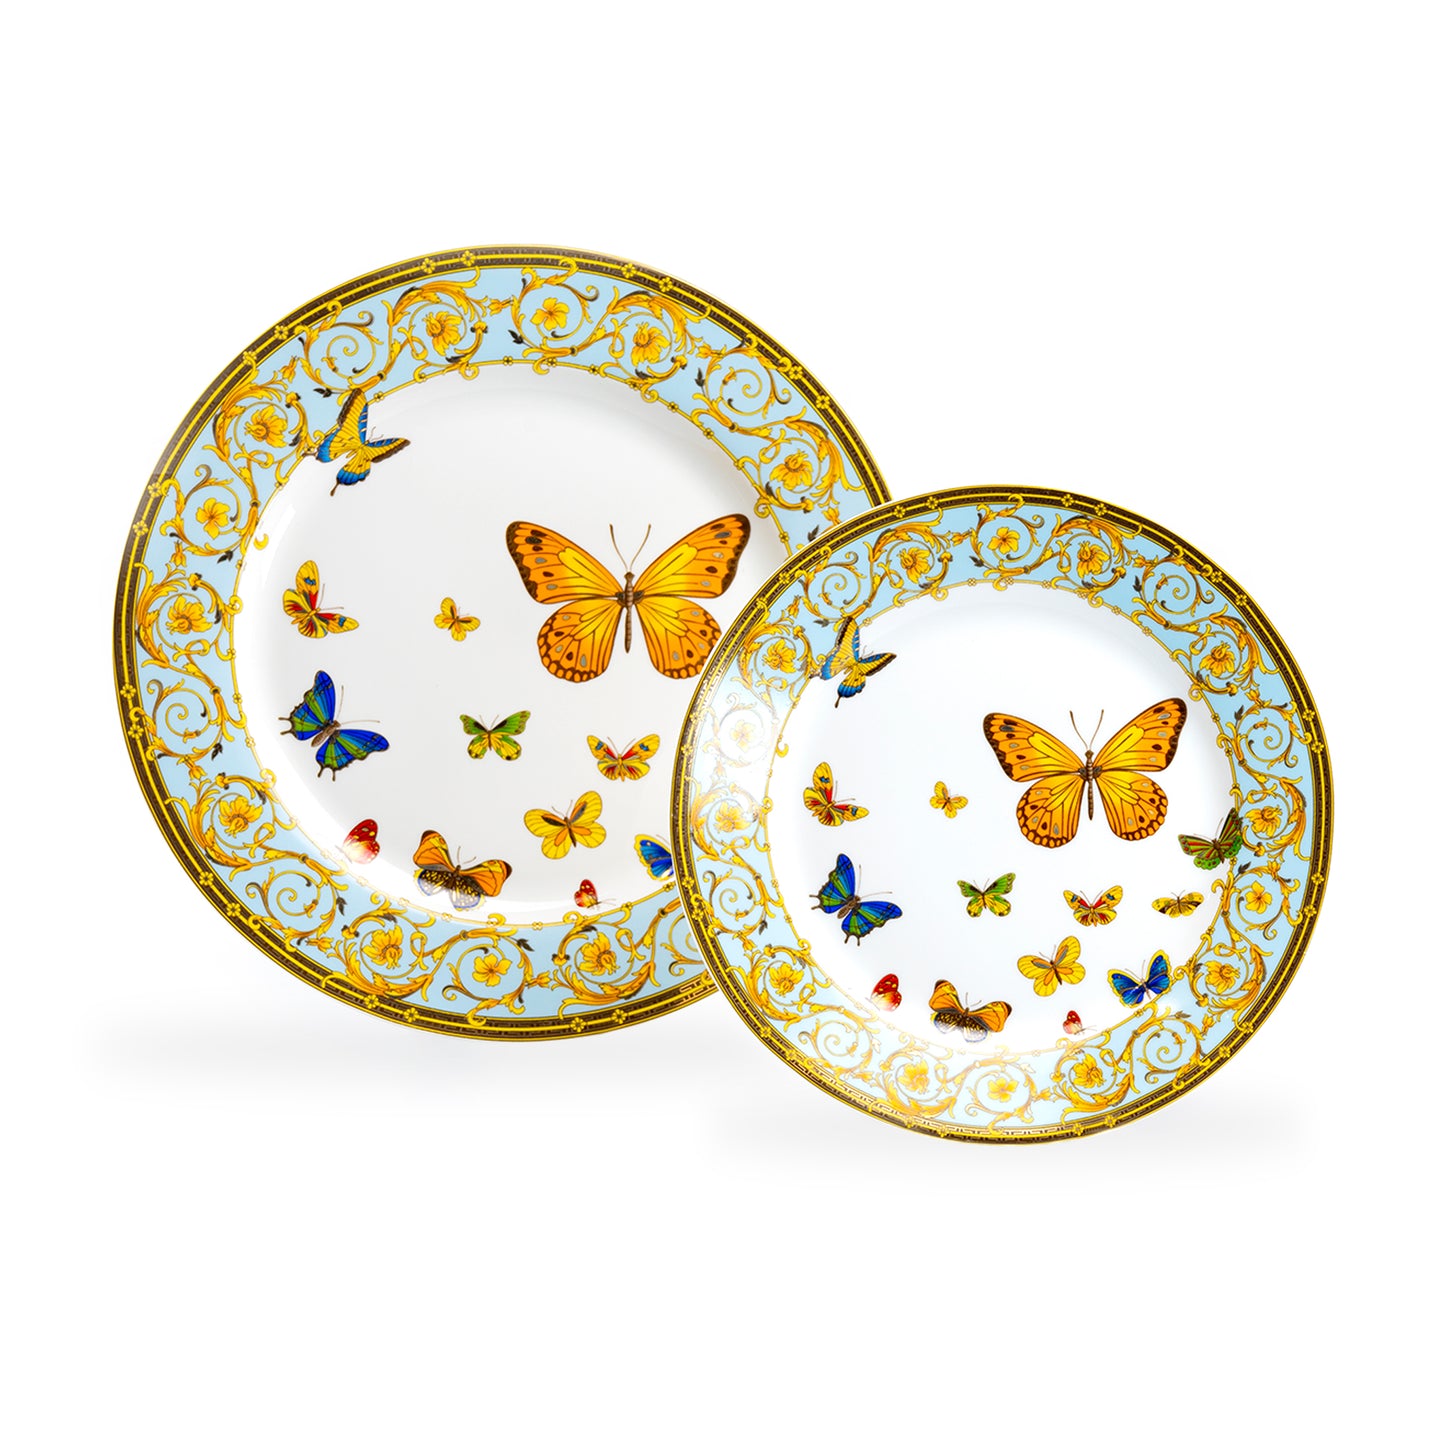 Butterflies with Blue Ornament Fine Porcelain Cup and Saucer